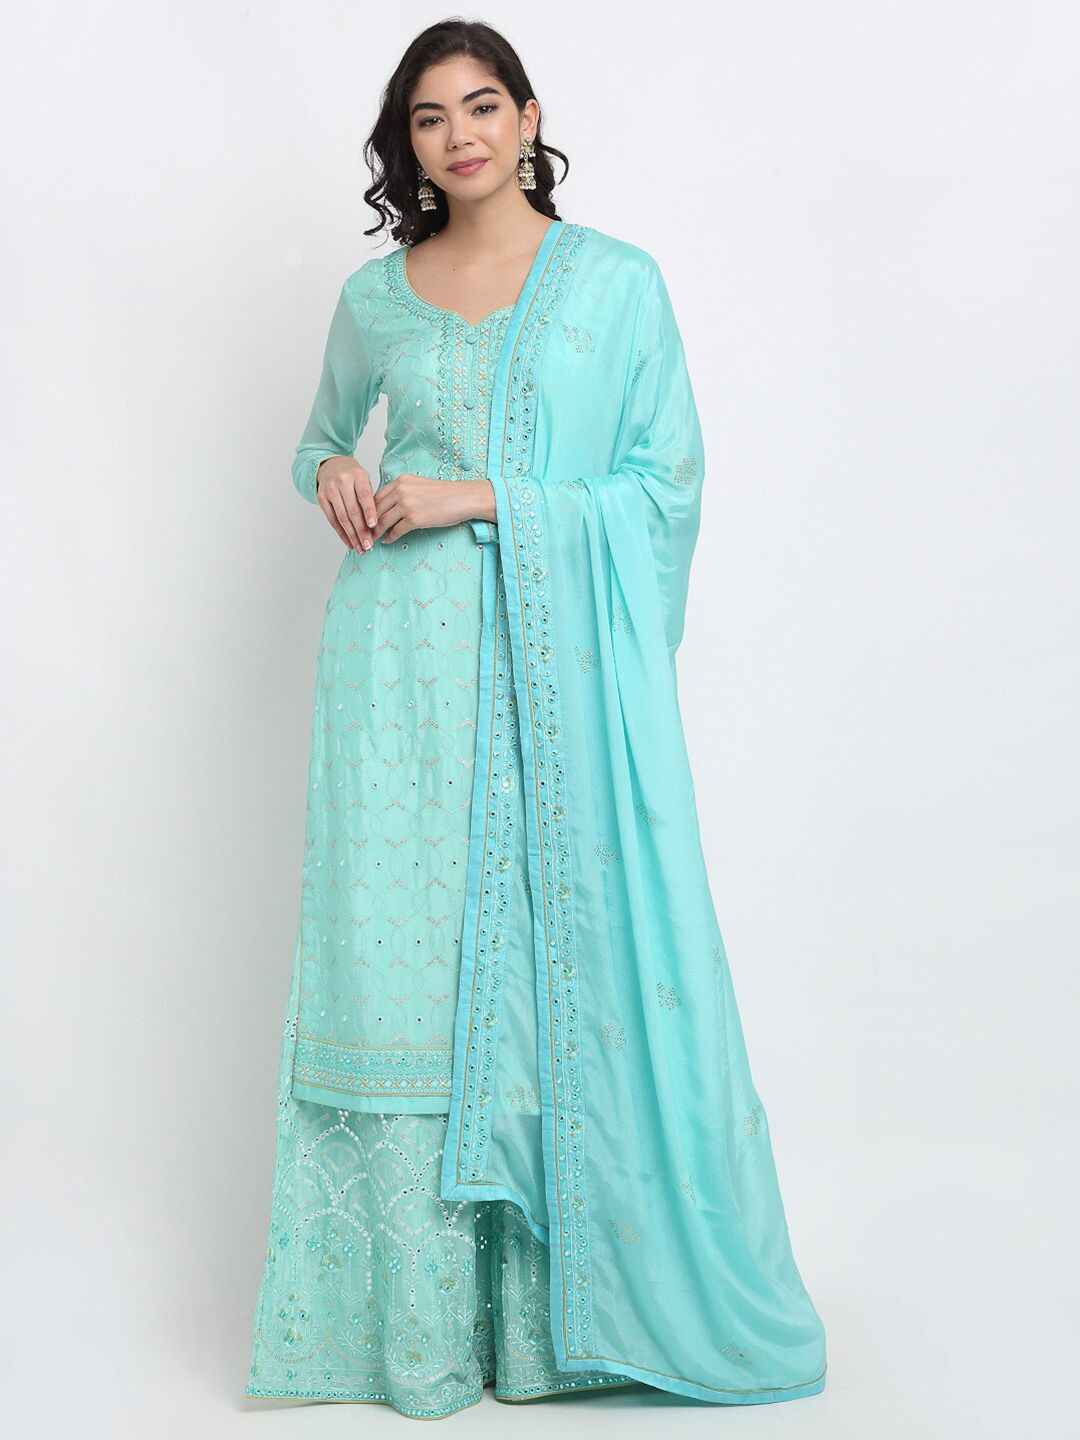 Stylee LIFESTYLE Turquoise Blue Embroidered Semi-Stitched Dress Material Price in India